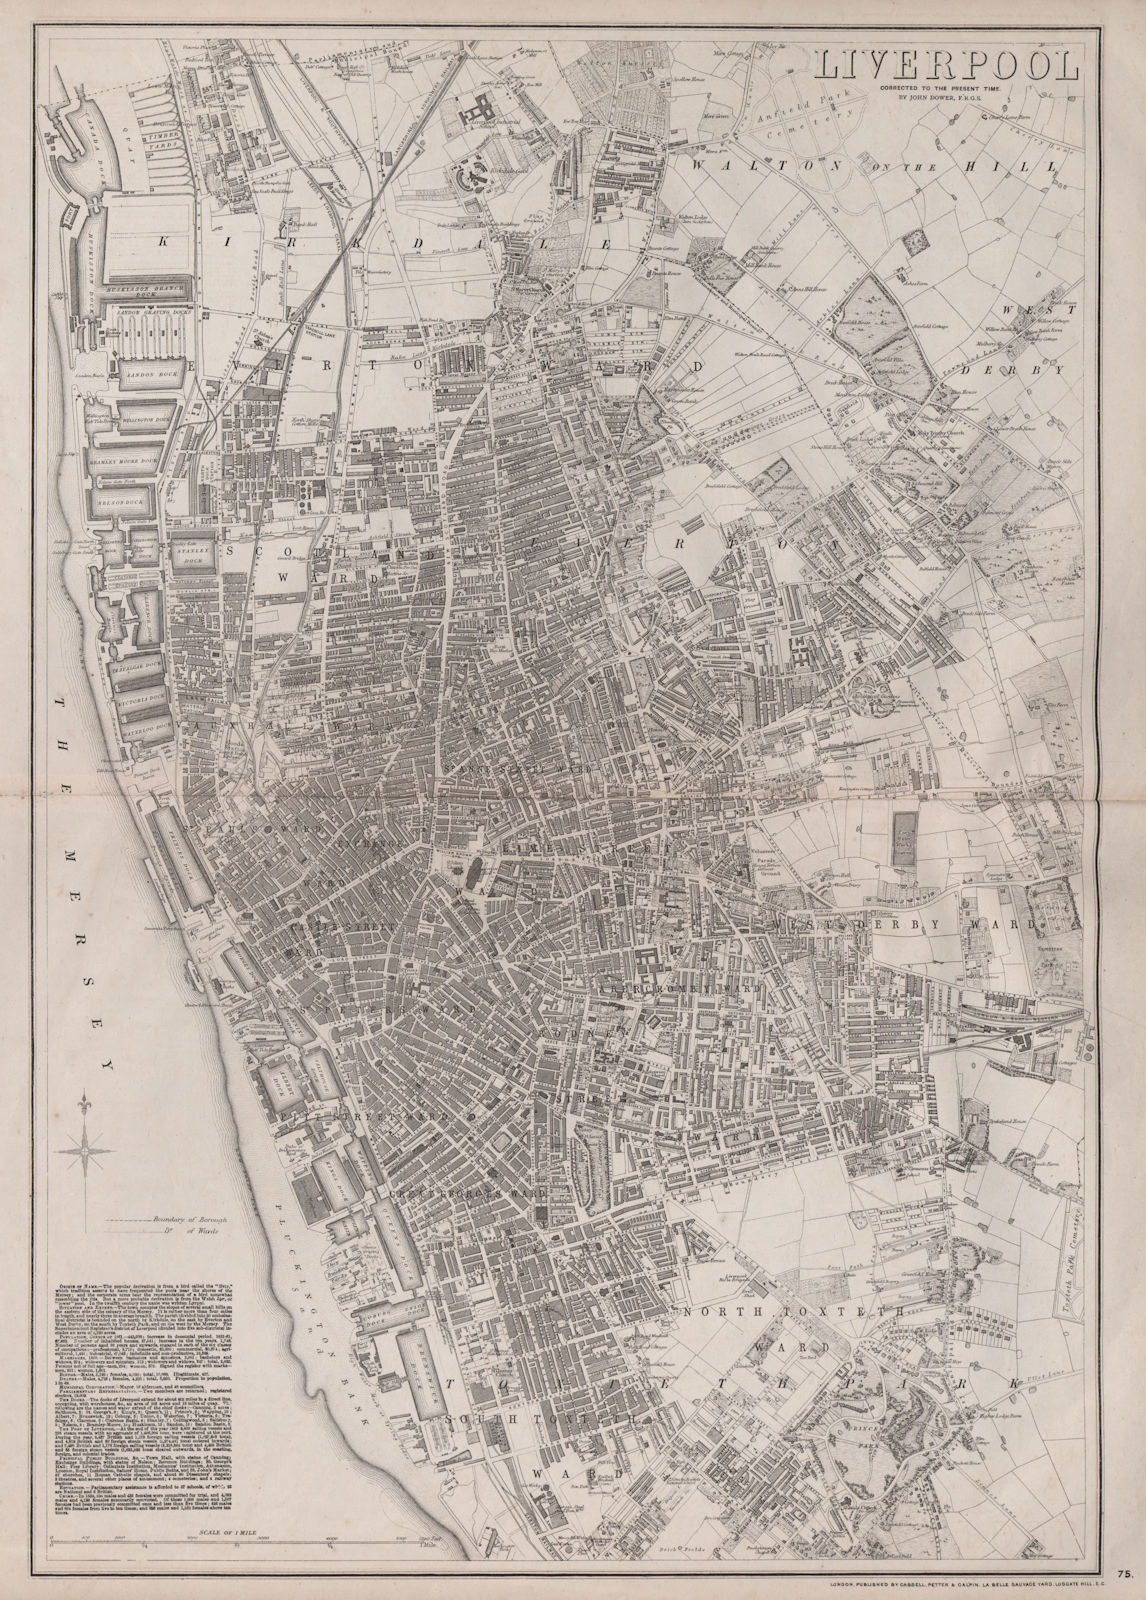 LIVERPOOL. Large town/city plan by BR DAVIES for the Dispatch Atlas 1868 map